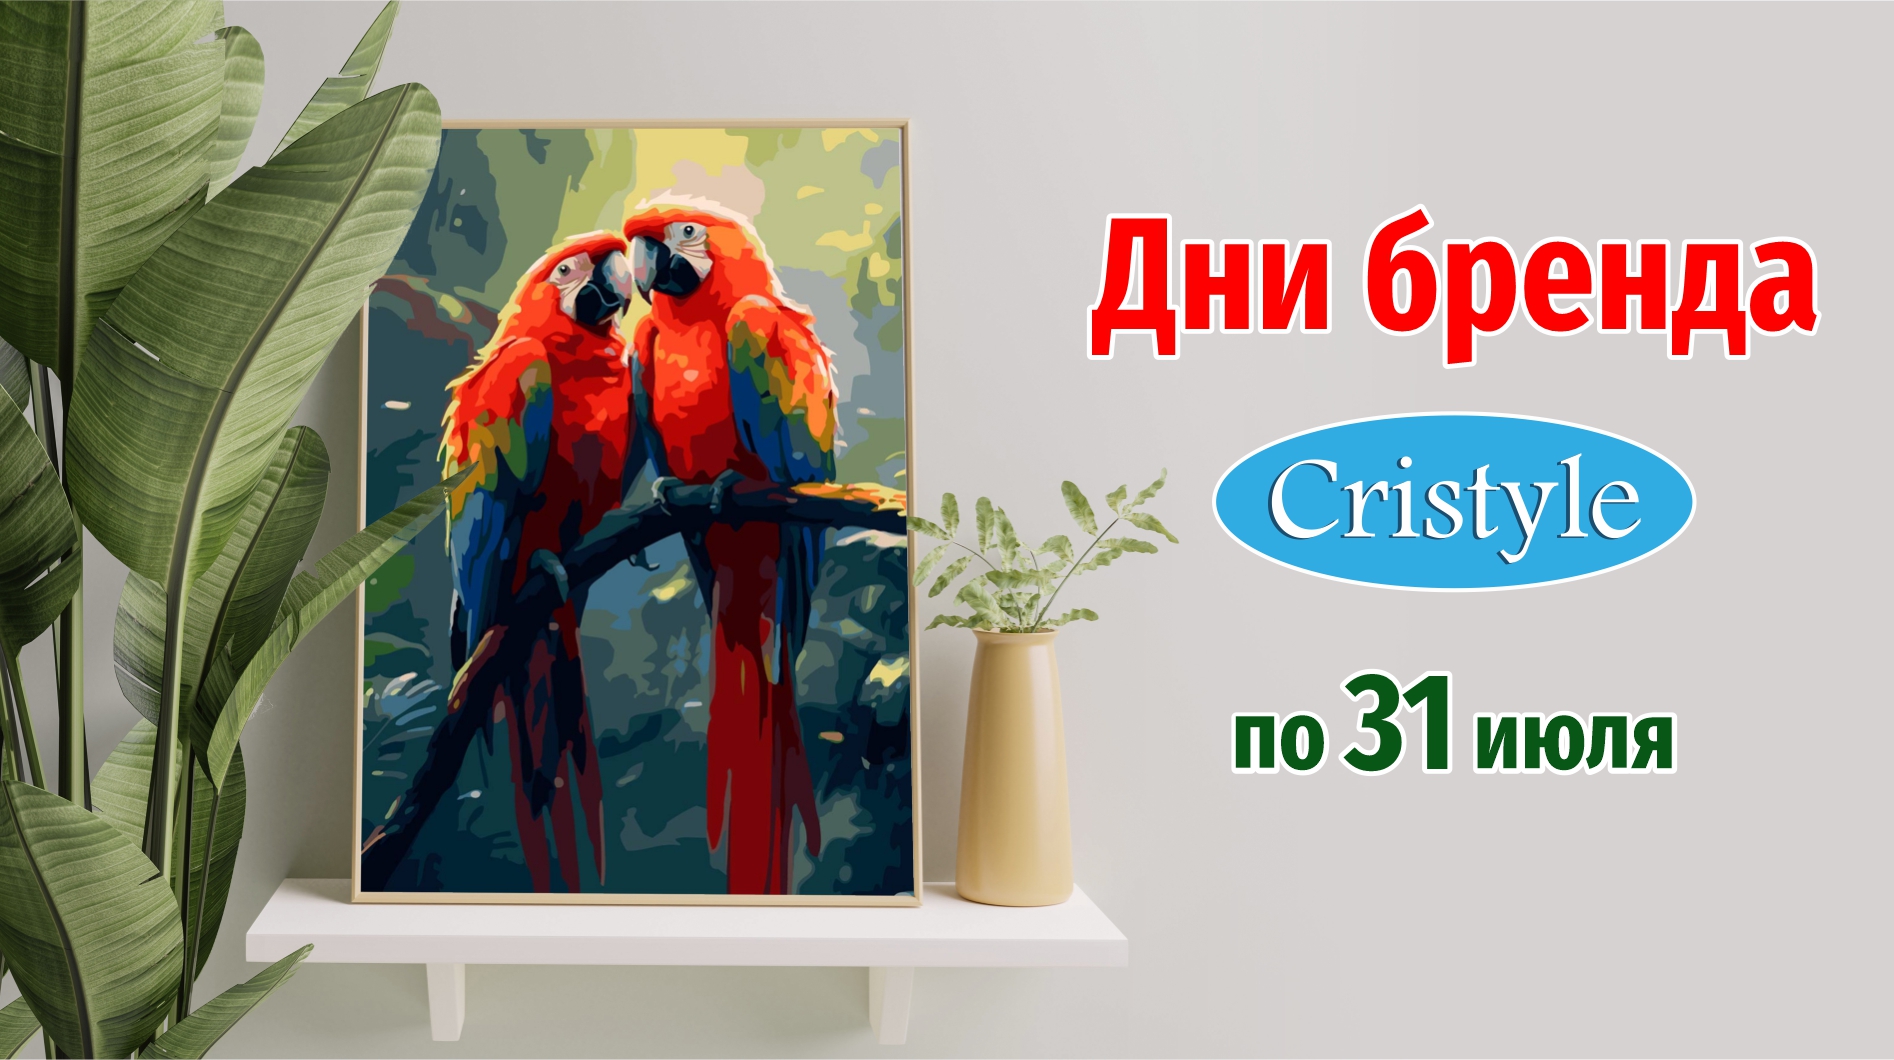 Дни бренда Cristyle